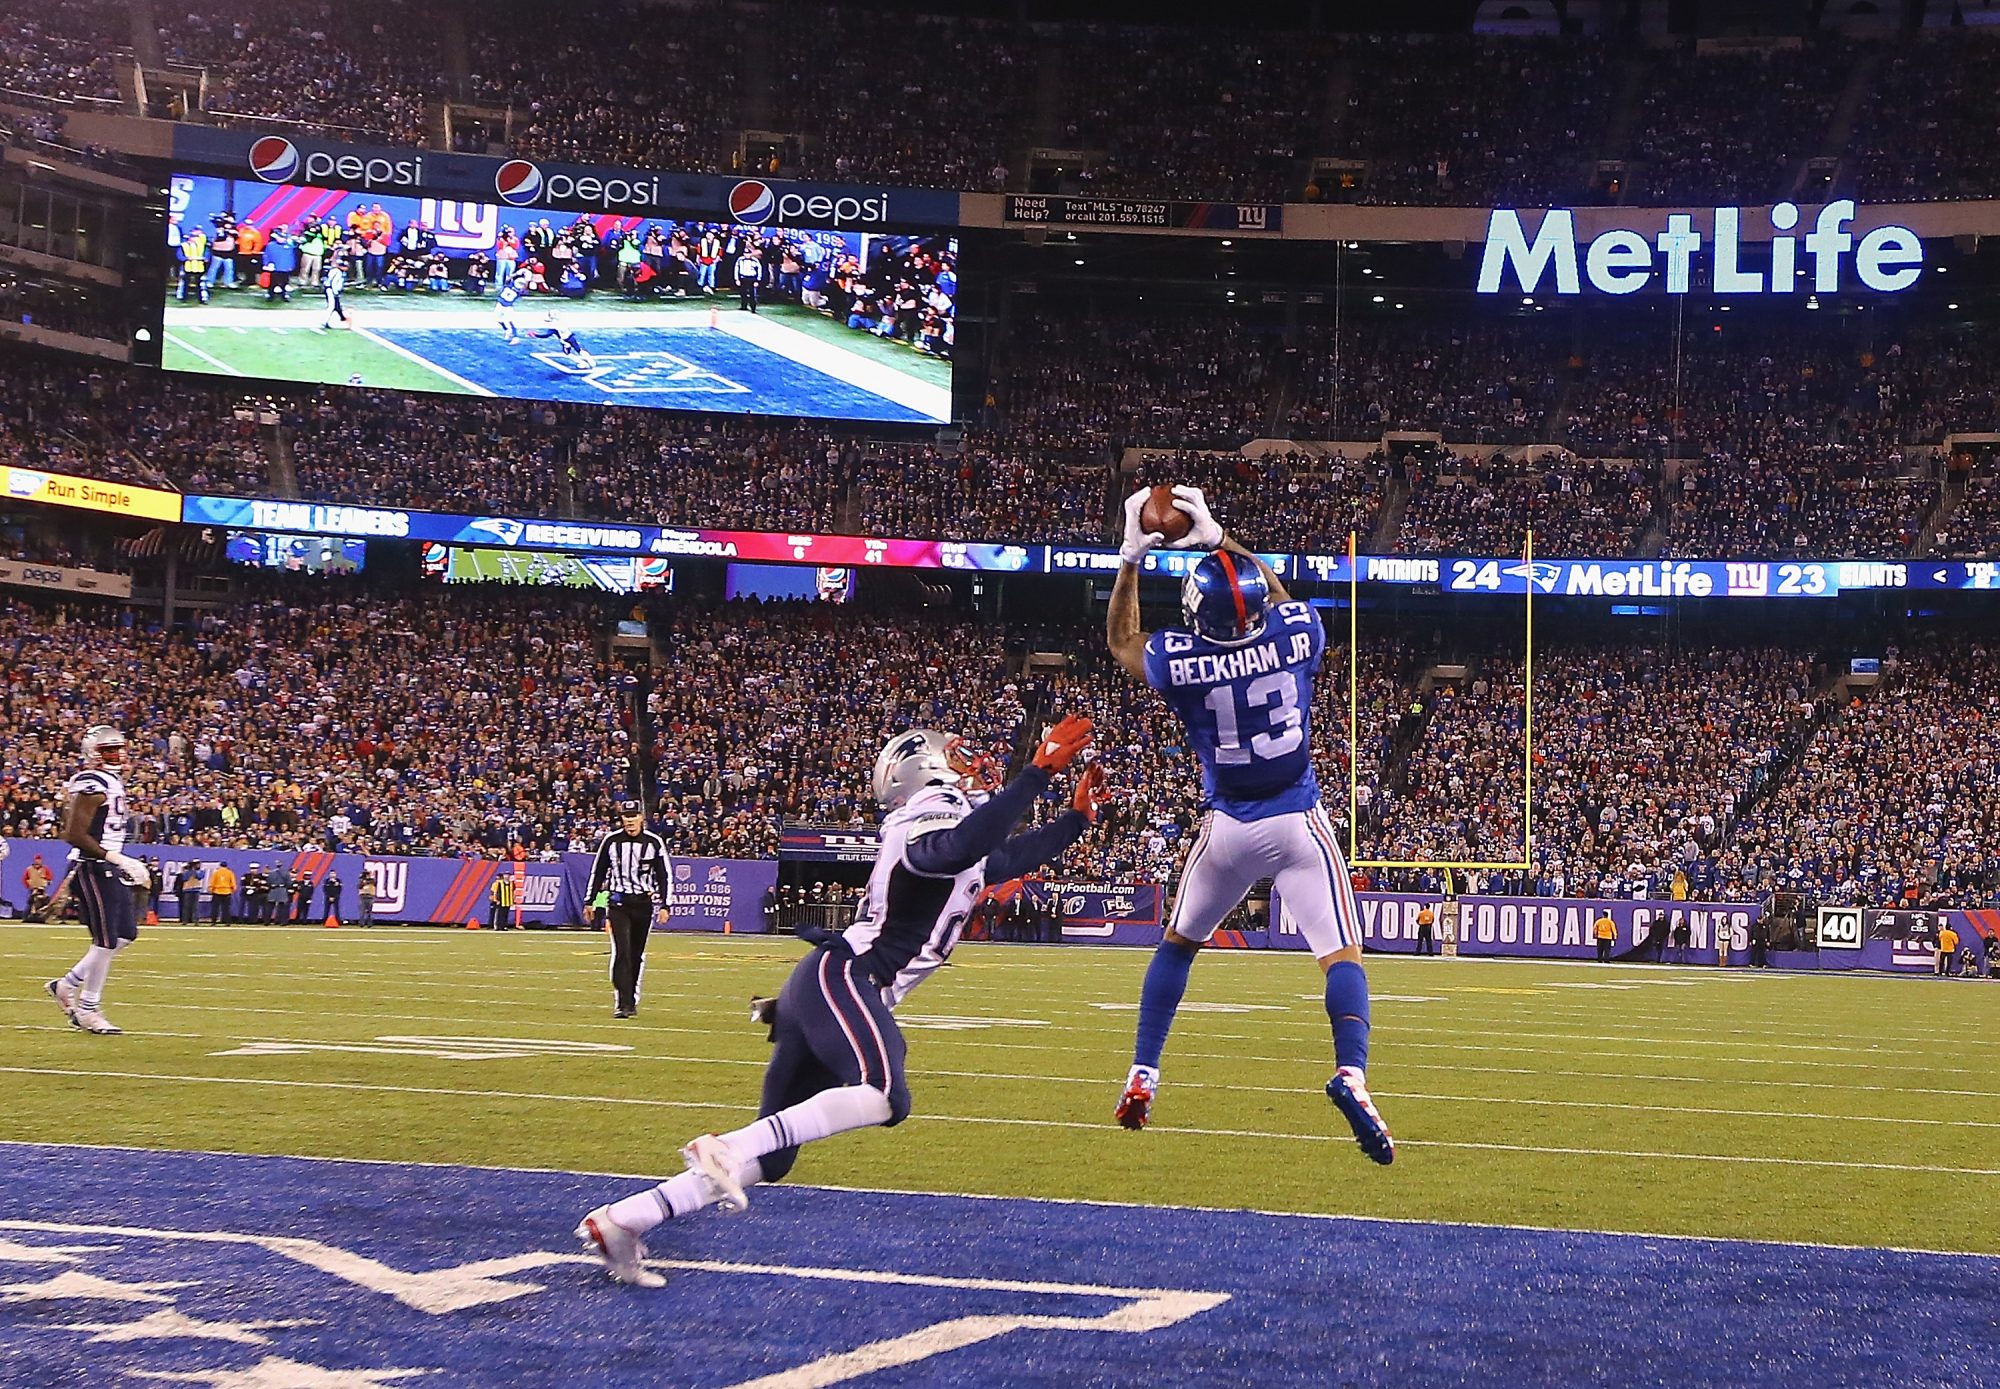 How Good Can the New York Giants Duo of Odell Beckham Jr. and Brandon Marshall Be? 2